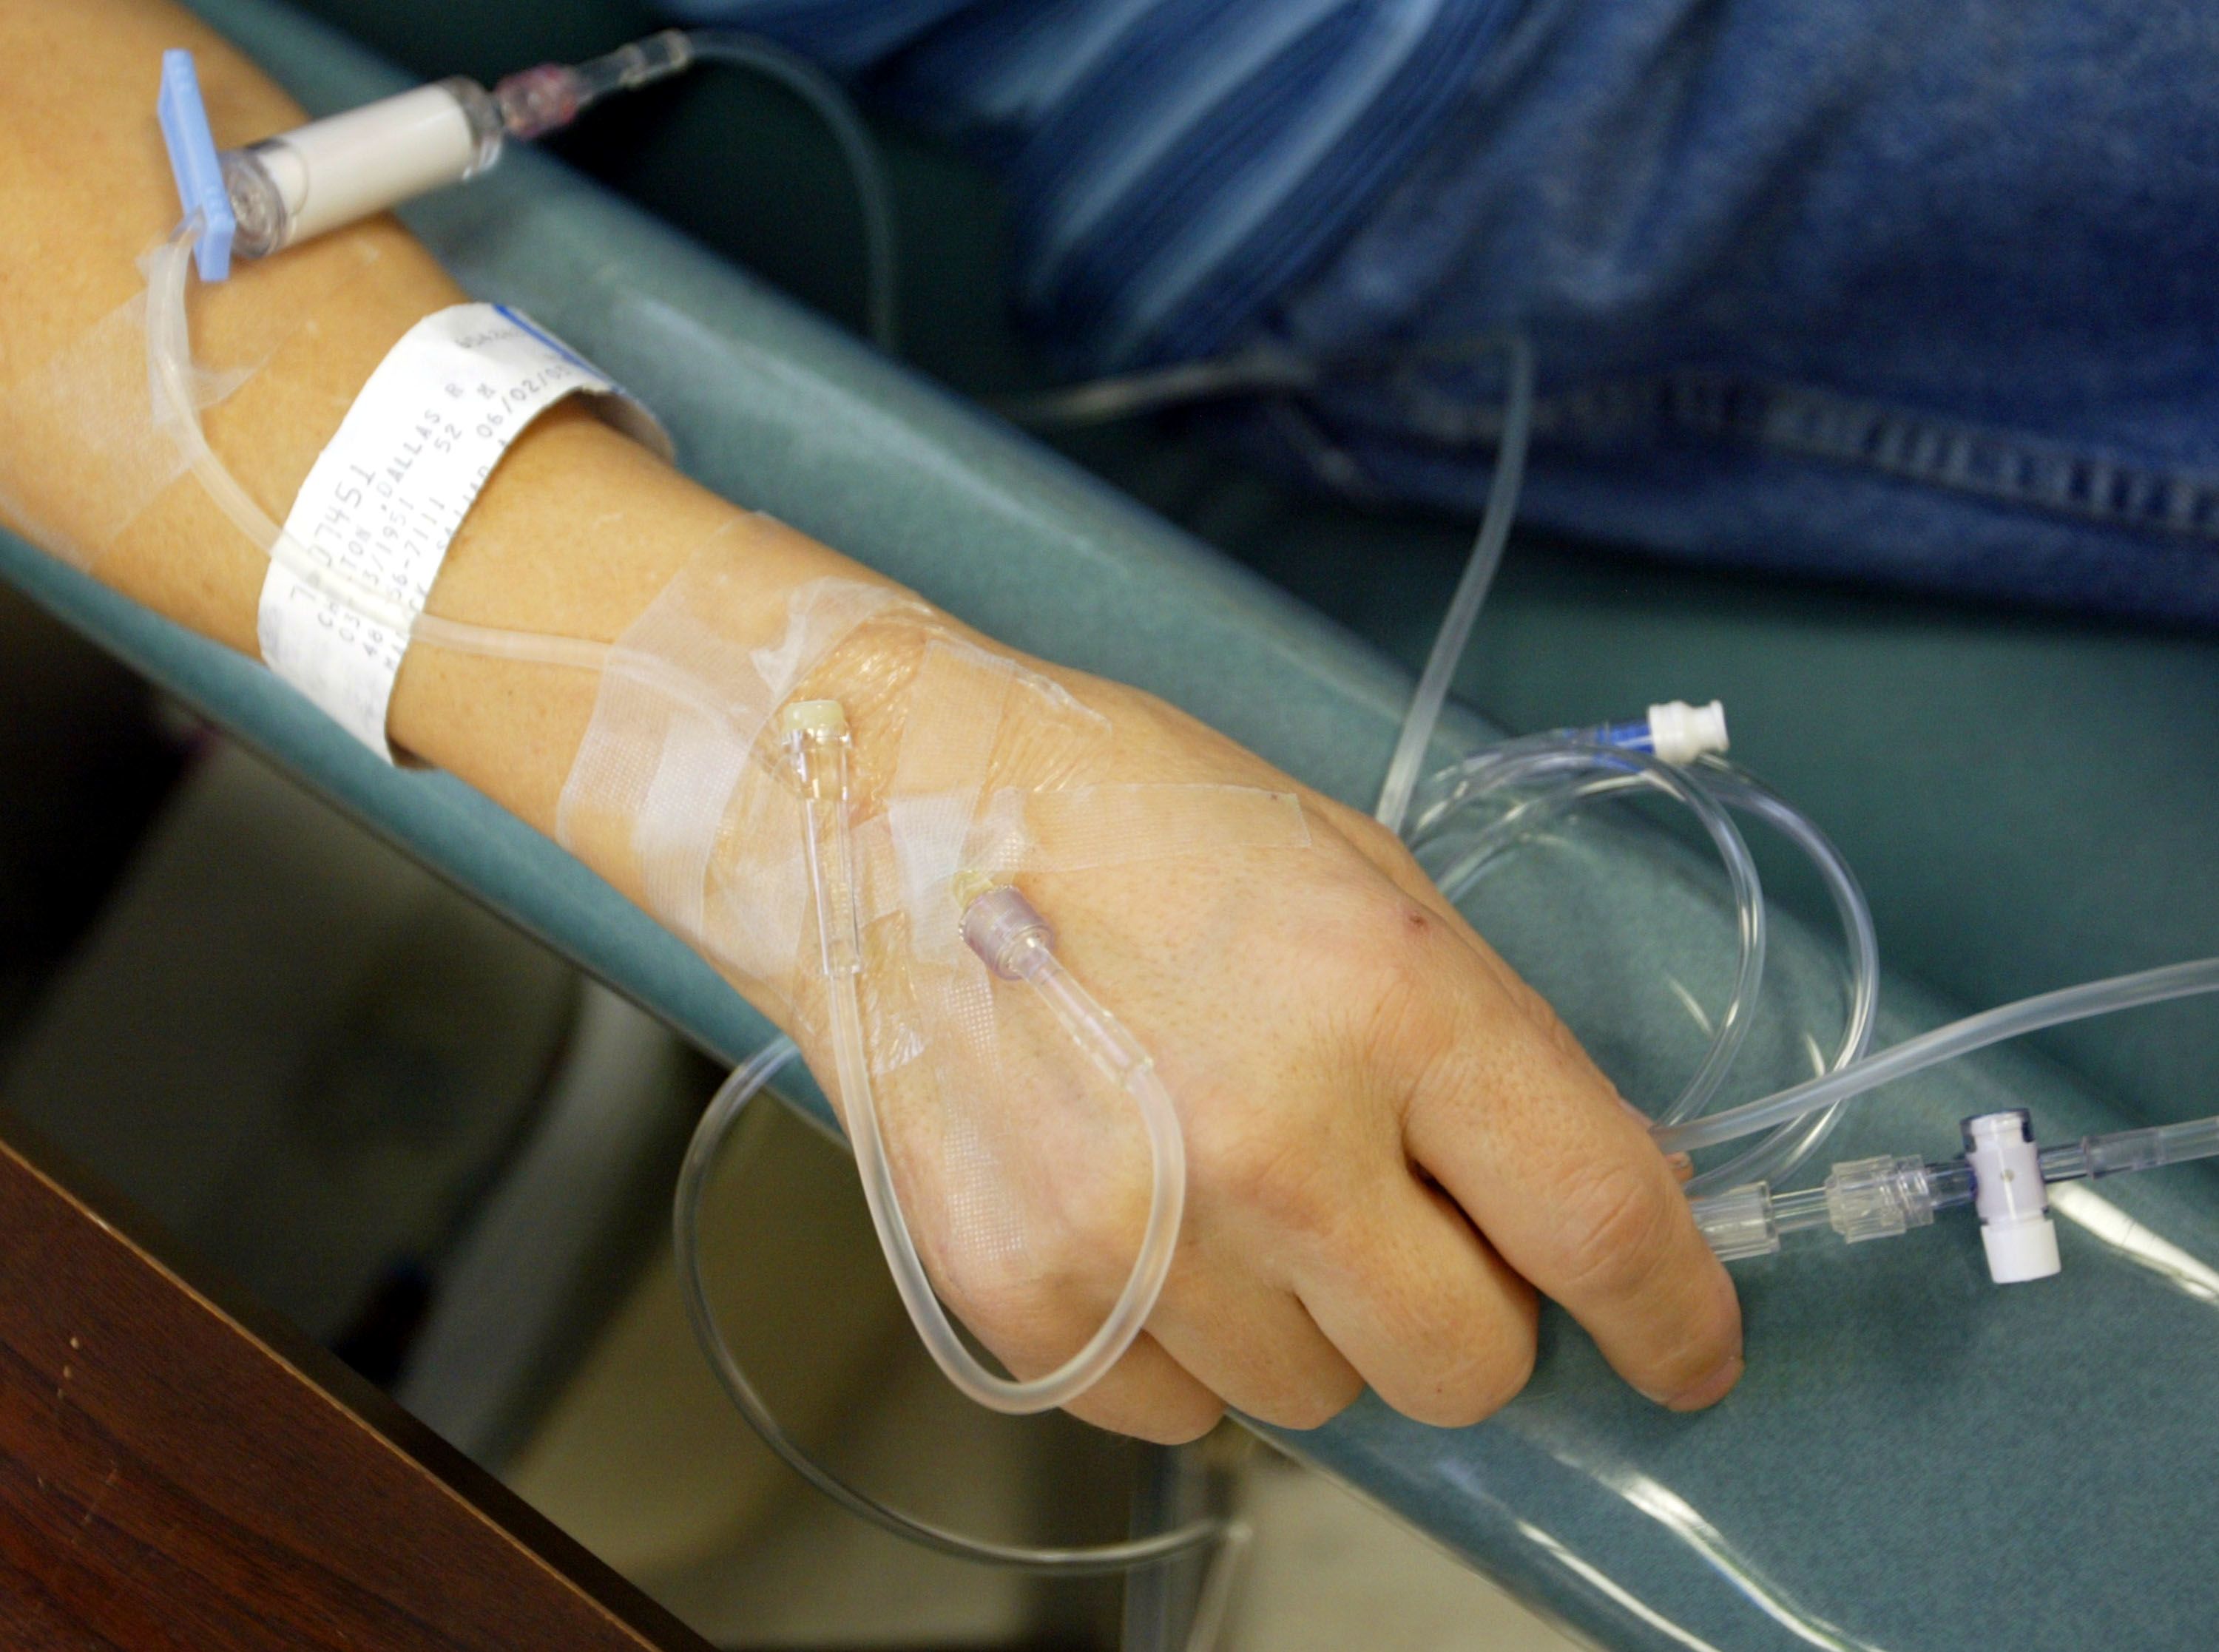 Do modern chemo drugs raise the risk of leukemia in some older patients?